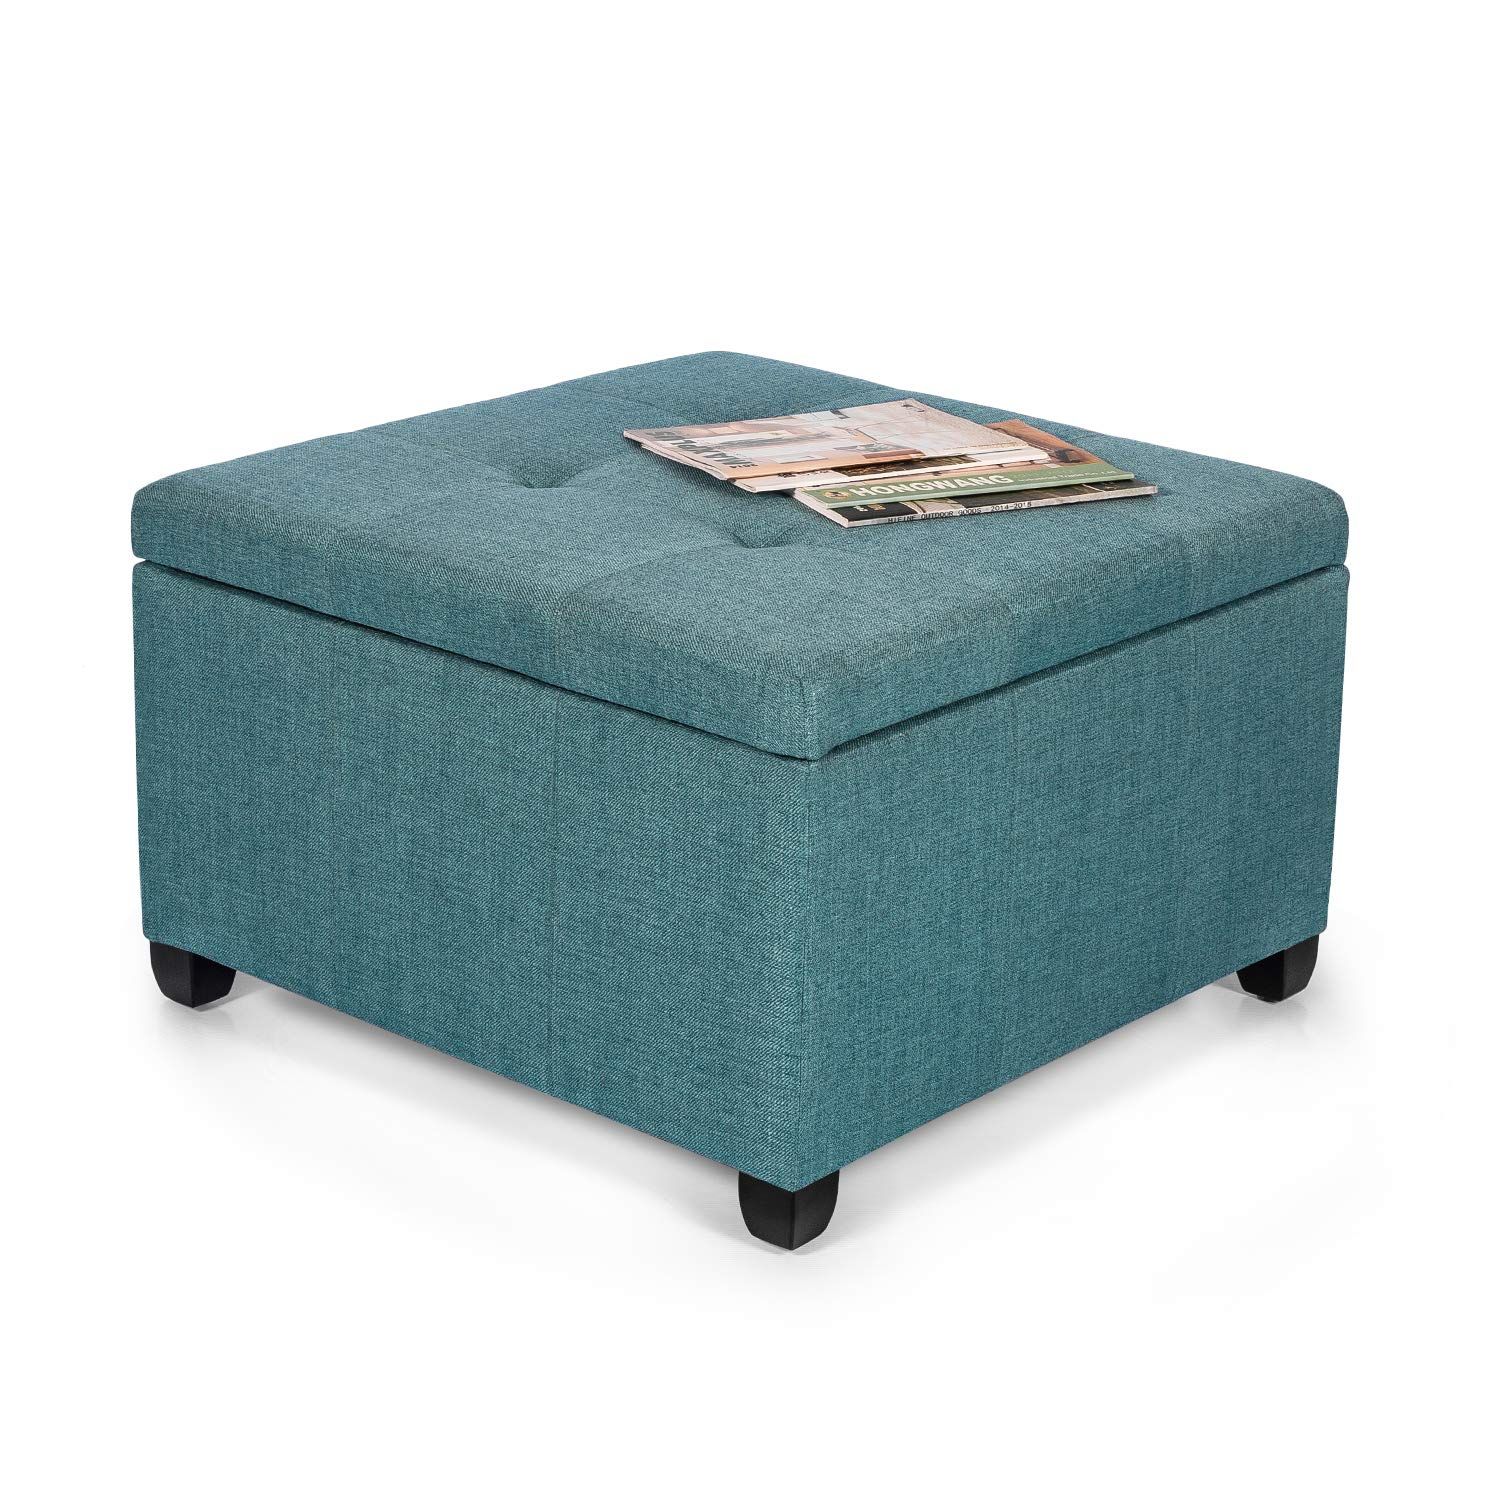 Homebeez Classic Square Seat Tufted Fabric Ottoman With Storage Chest Inside Natural Fabric Square Ottomans (View 2 of 20)